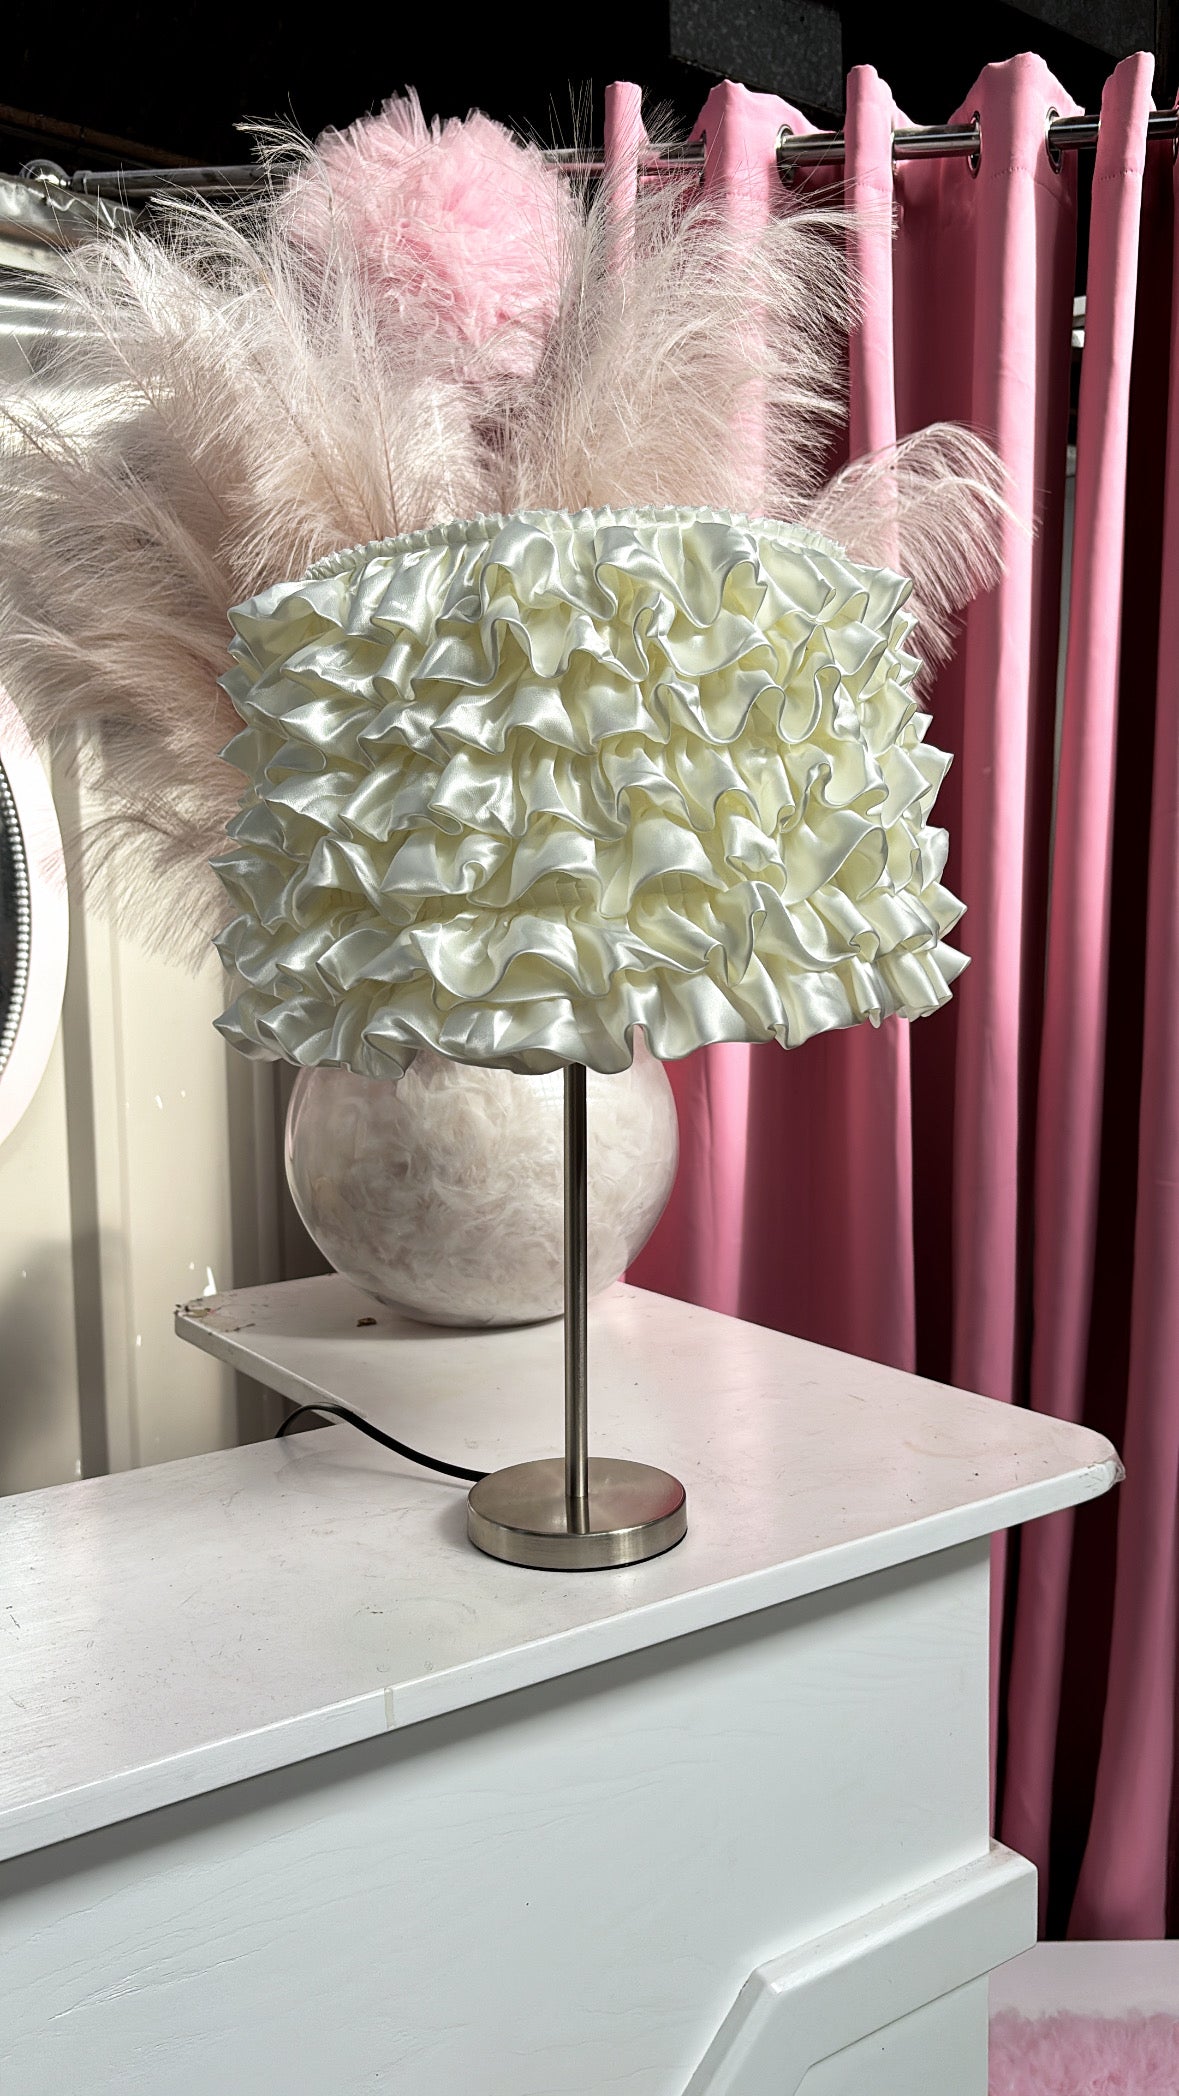 SATIN FRILLY TABLE LAMP 2-4 WEEKS